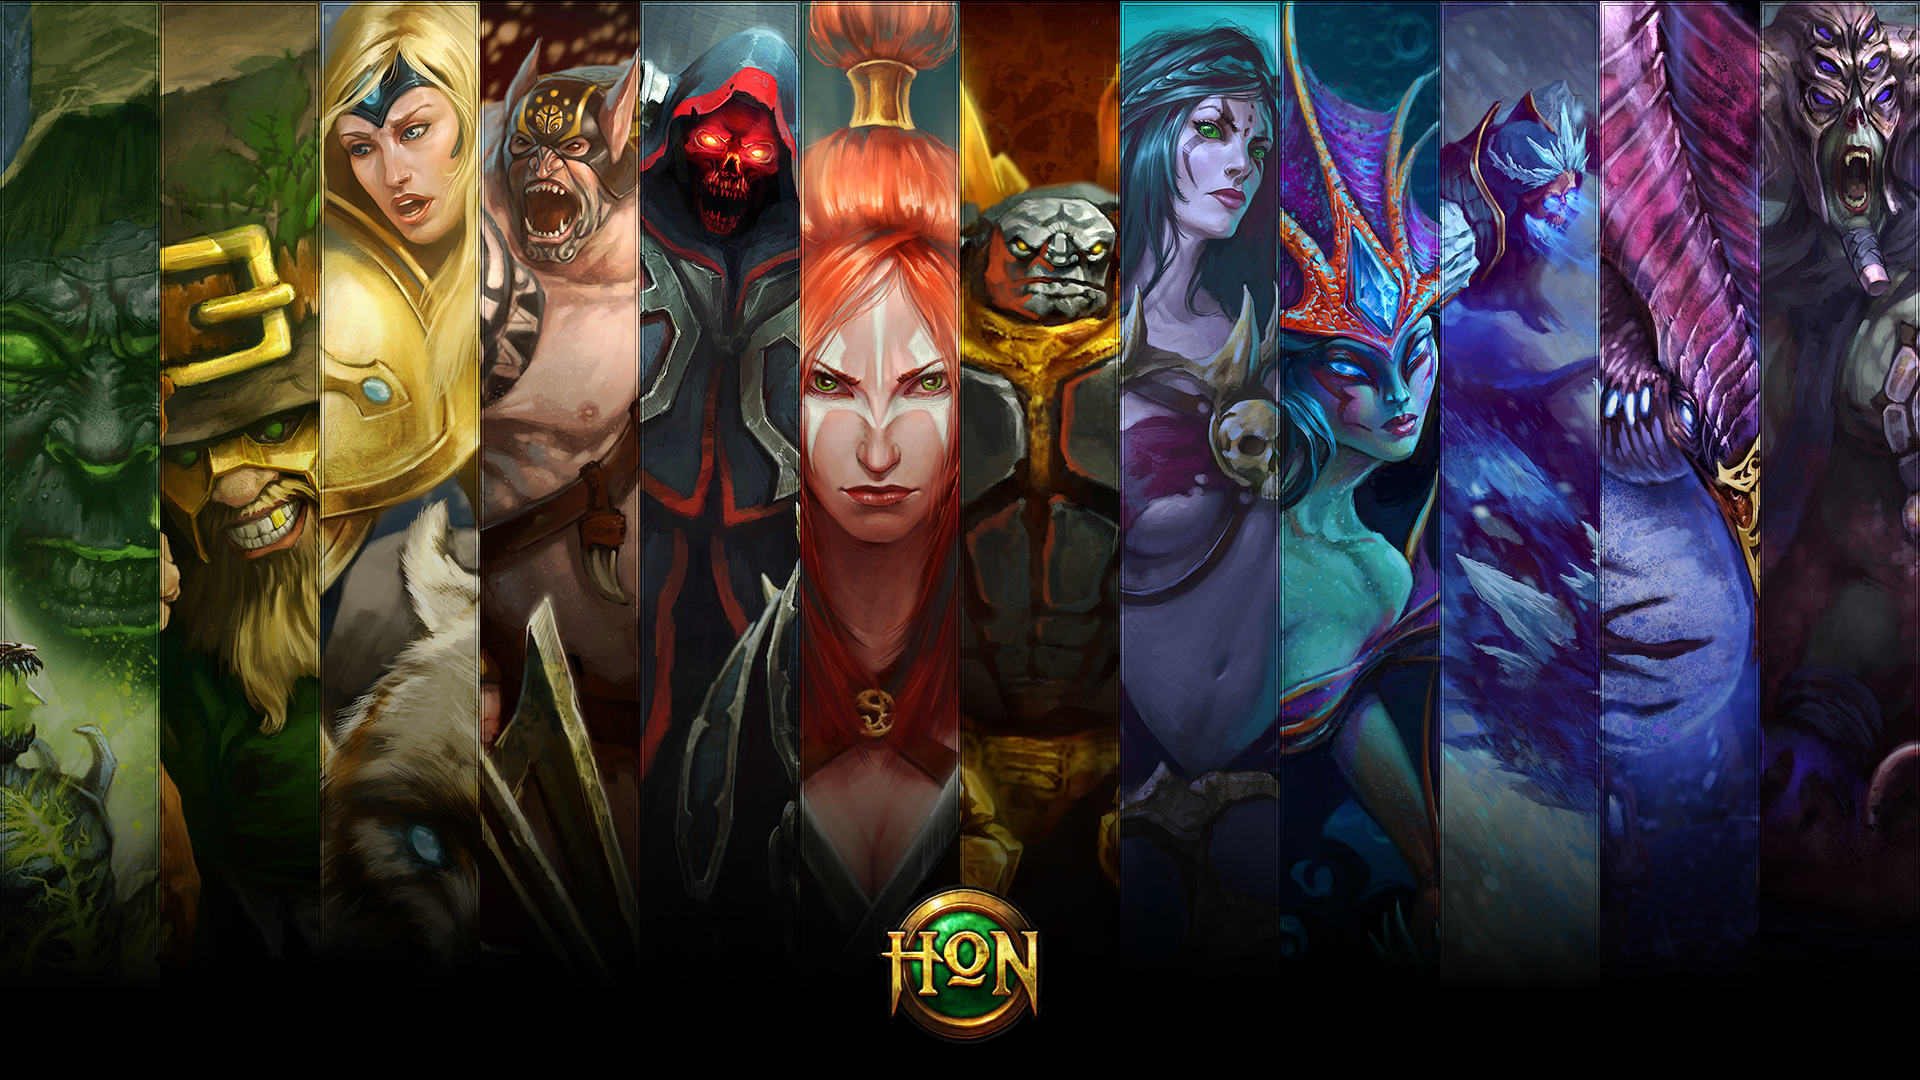 Heroes of newerth wallpaper by warchamp on